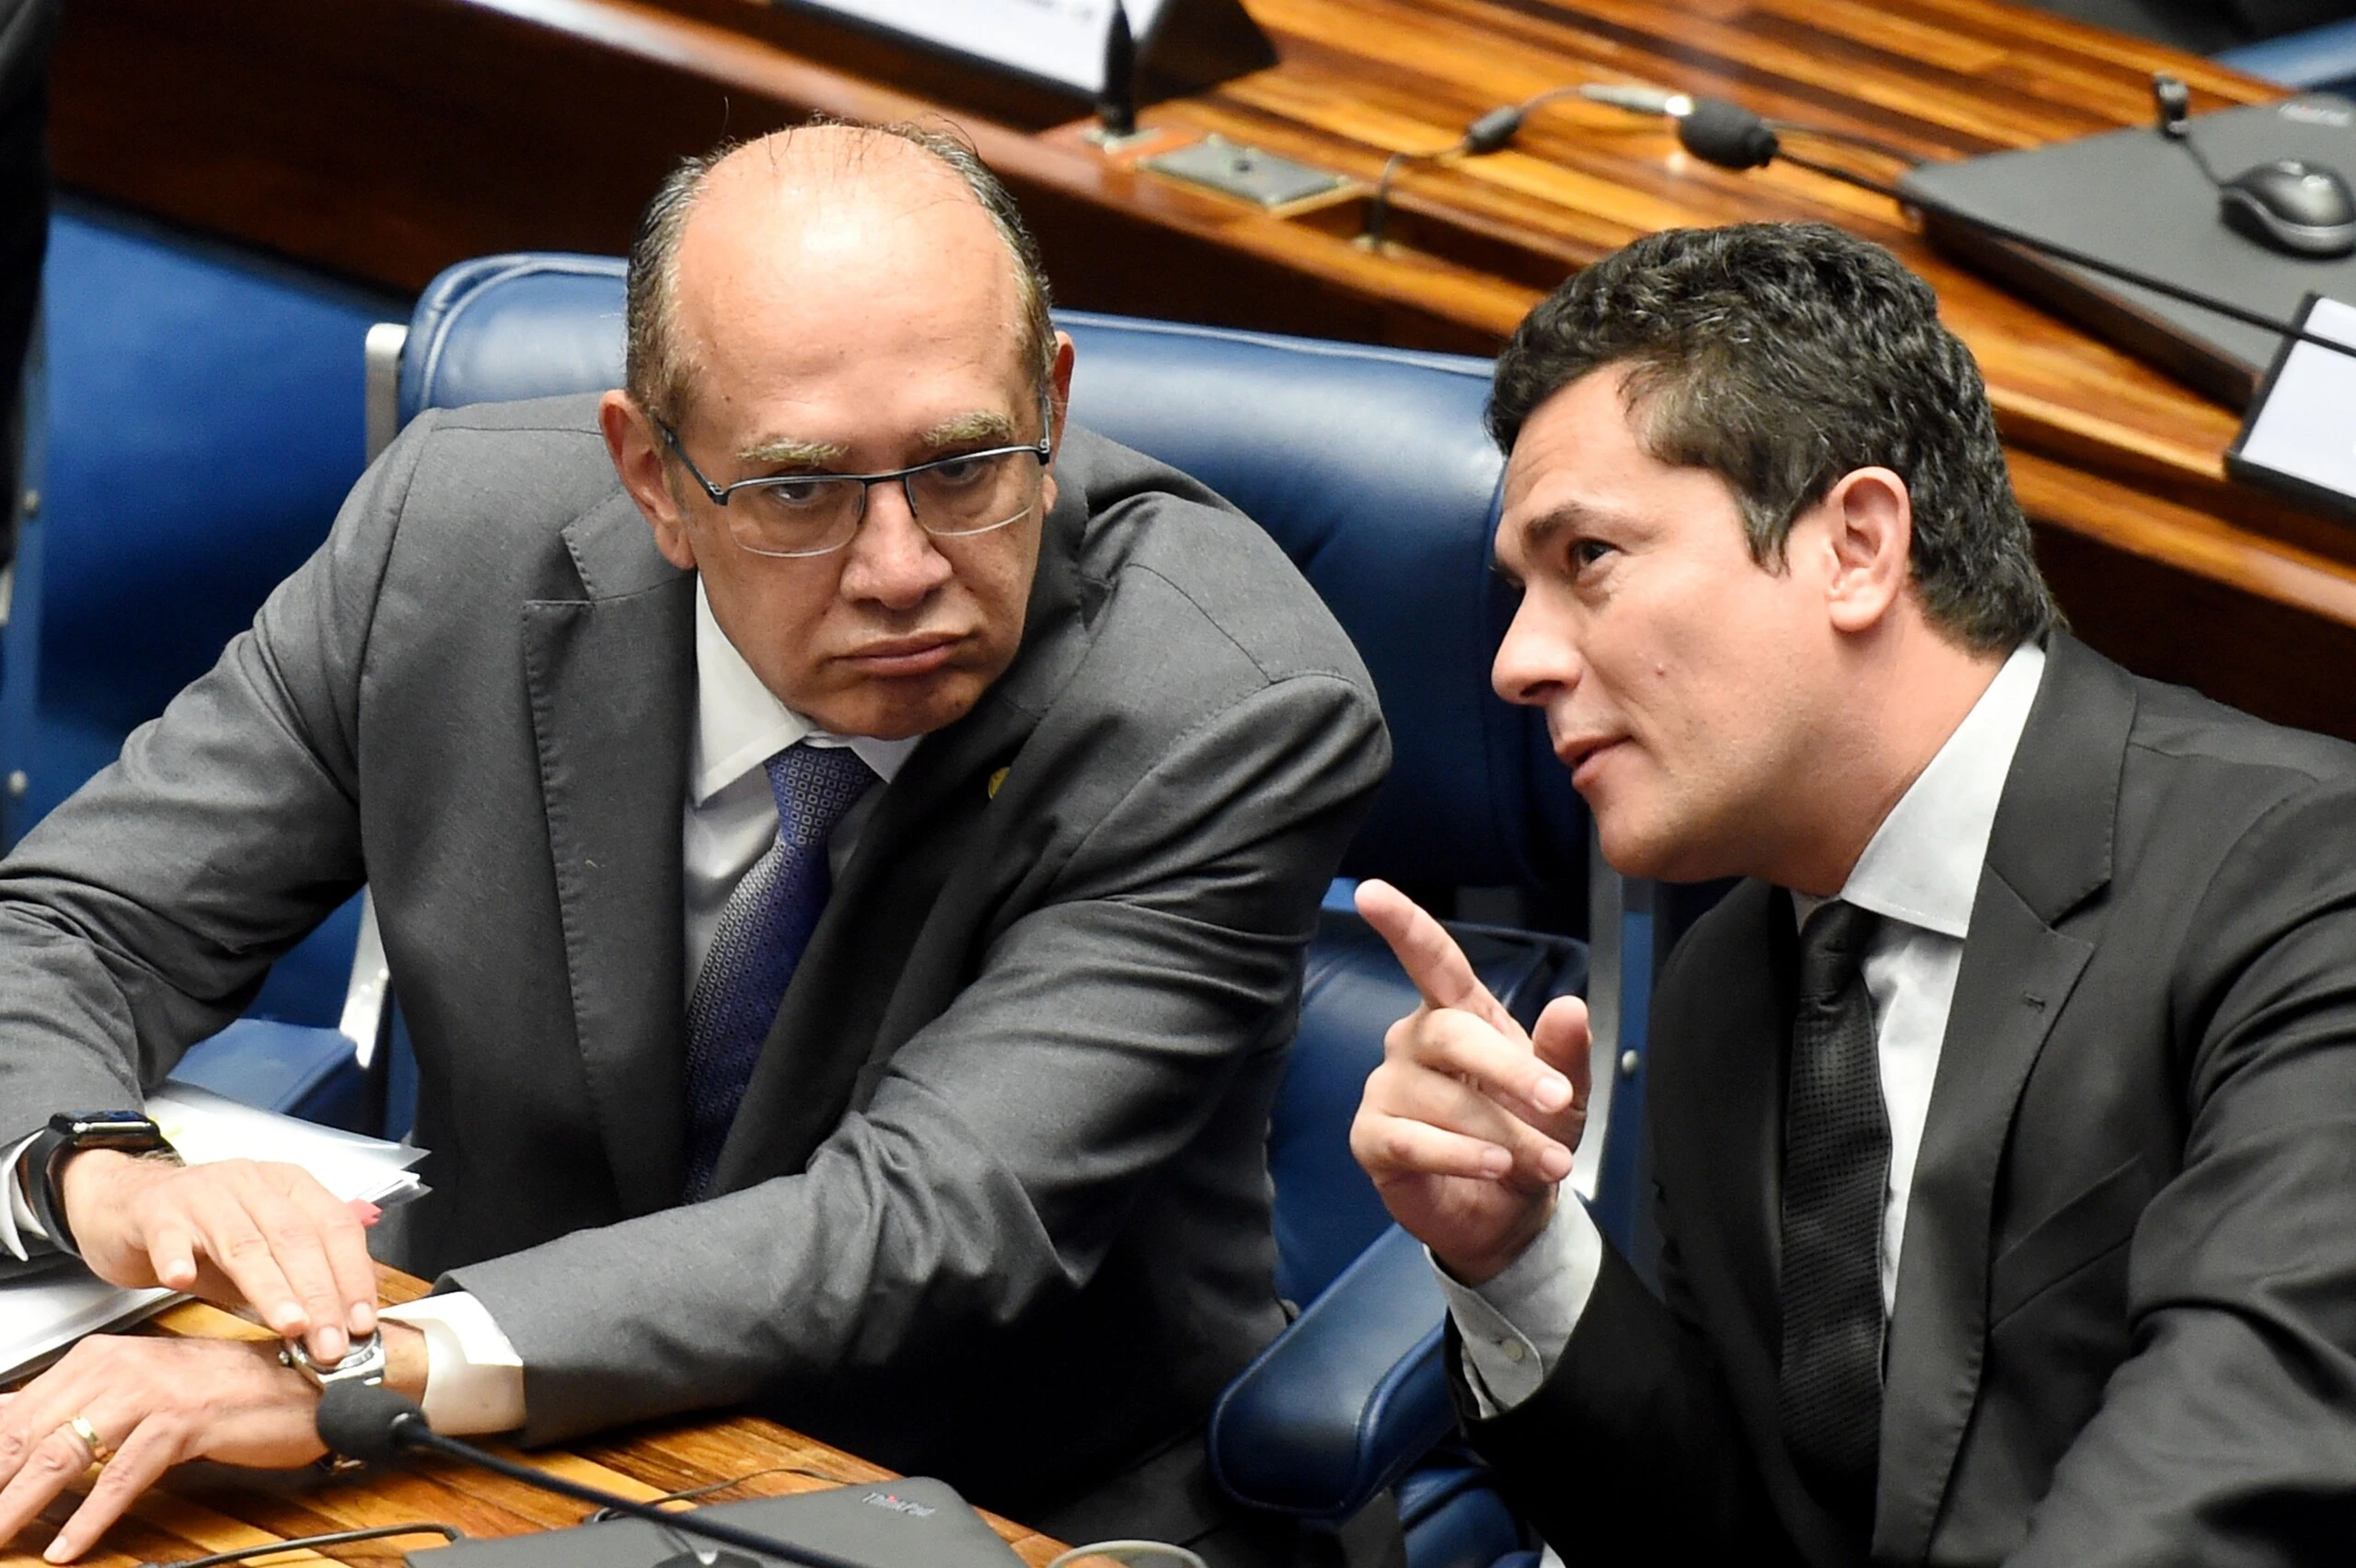 Supreme Court's Judge Gilmar Mendes (L) listens to Federal Judge Sergio Moro during a public hearing on the bill that establishes the abuse of authority for judges and prosecutors, in the Senate in Brasilia on December 1, 2016.<br /> Even with a strong reaction against the bill from the public, Calheiros tries to speed up approval in the Senate and Lower House. The controversial law is ostensibly meant to crack down on undeclared election campaign funds, a common practice in Brazilian politics that has been linked to large-scale corruption. Judges and prosecutors have branded this as a weapon to reduce the judiciary's independence. / AFP / EVARISTO SA        (Photo credit should read EVARISTO SA/AFP/Getty Images)